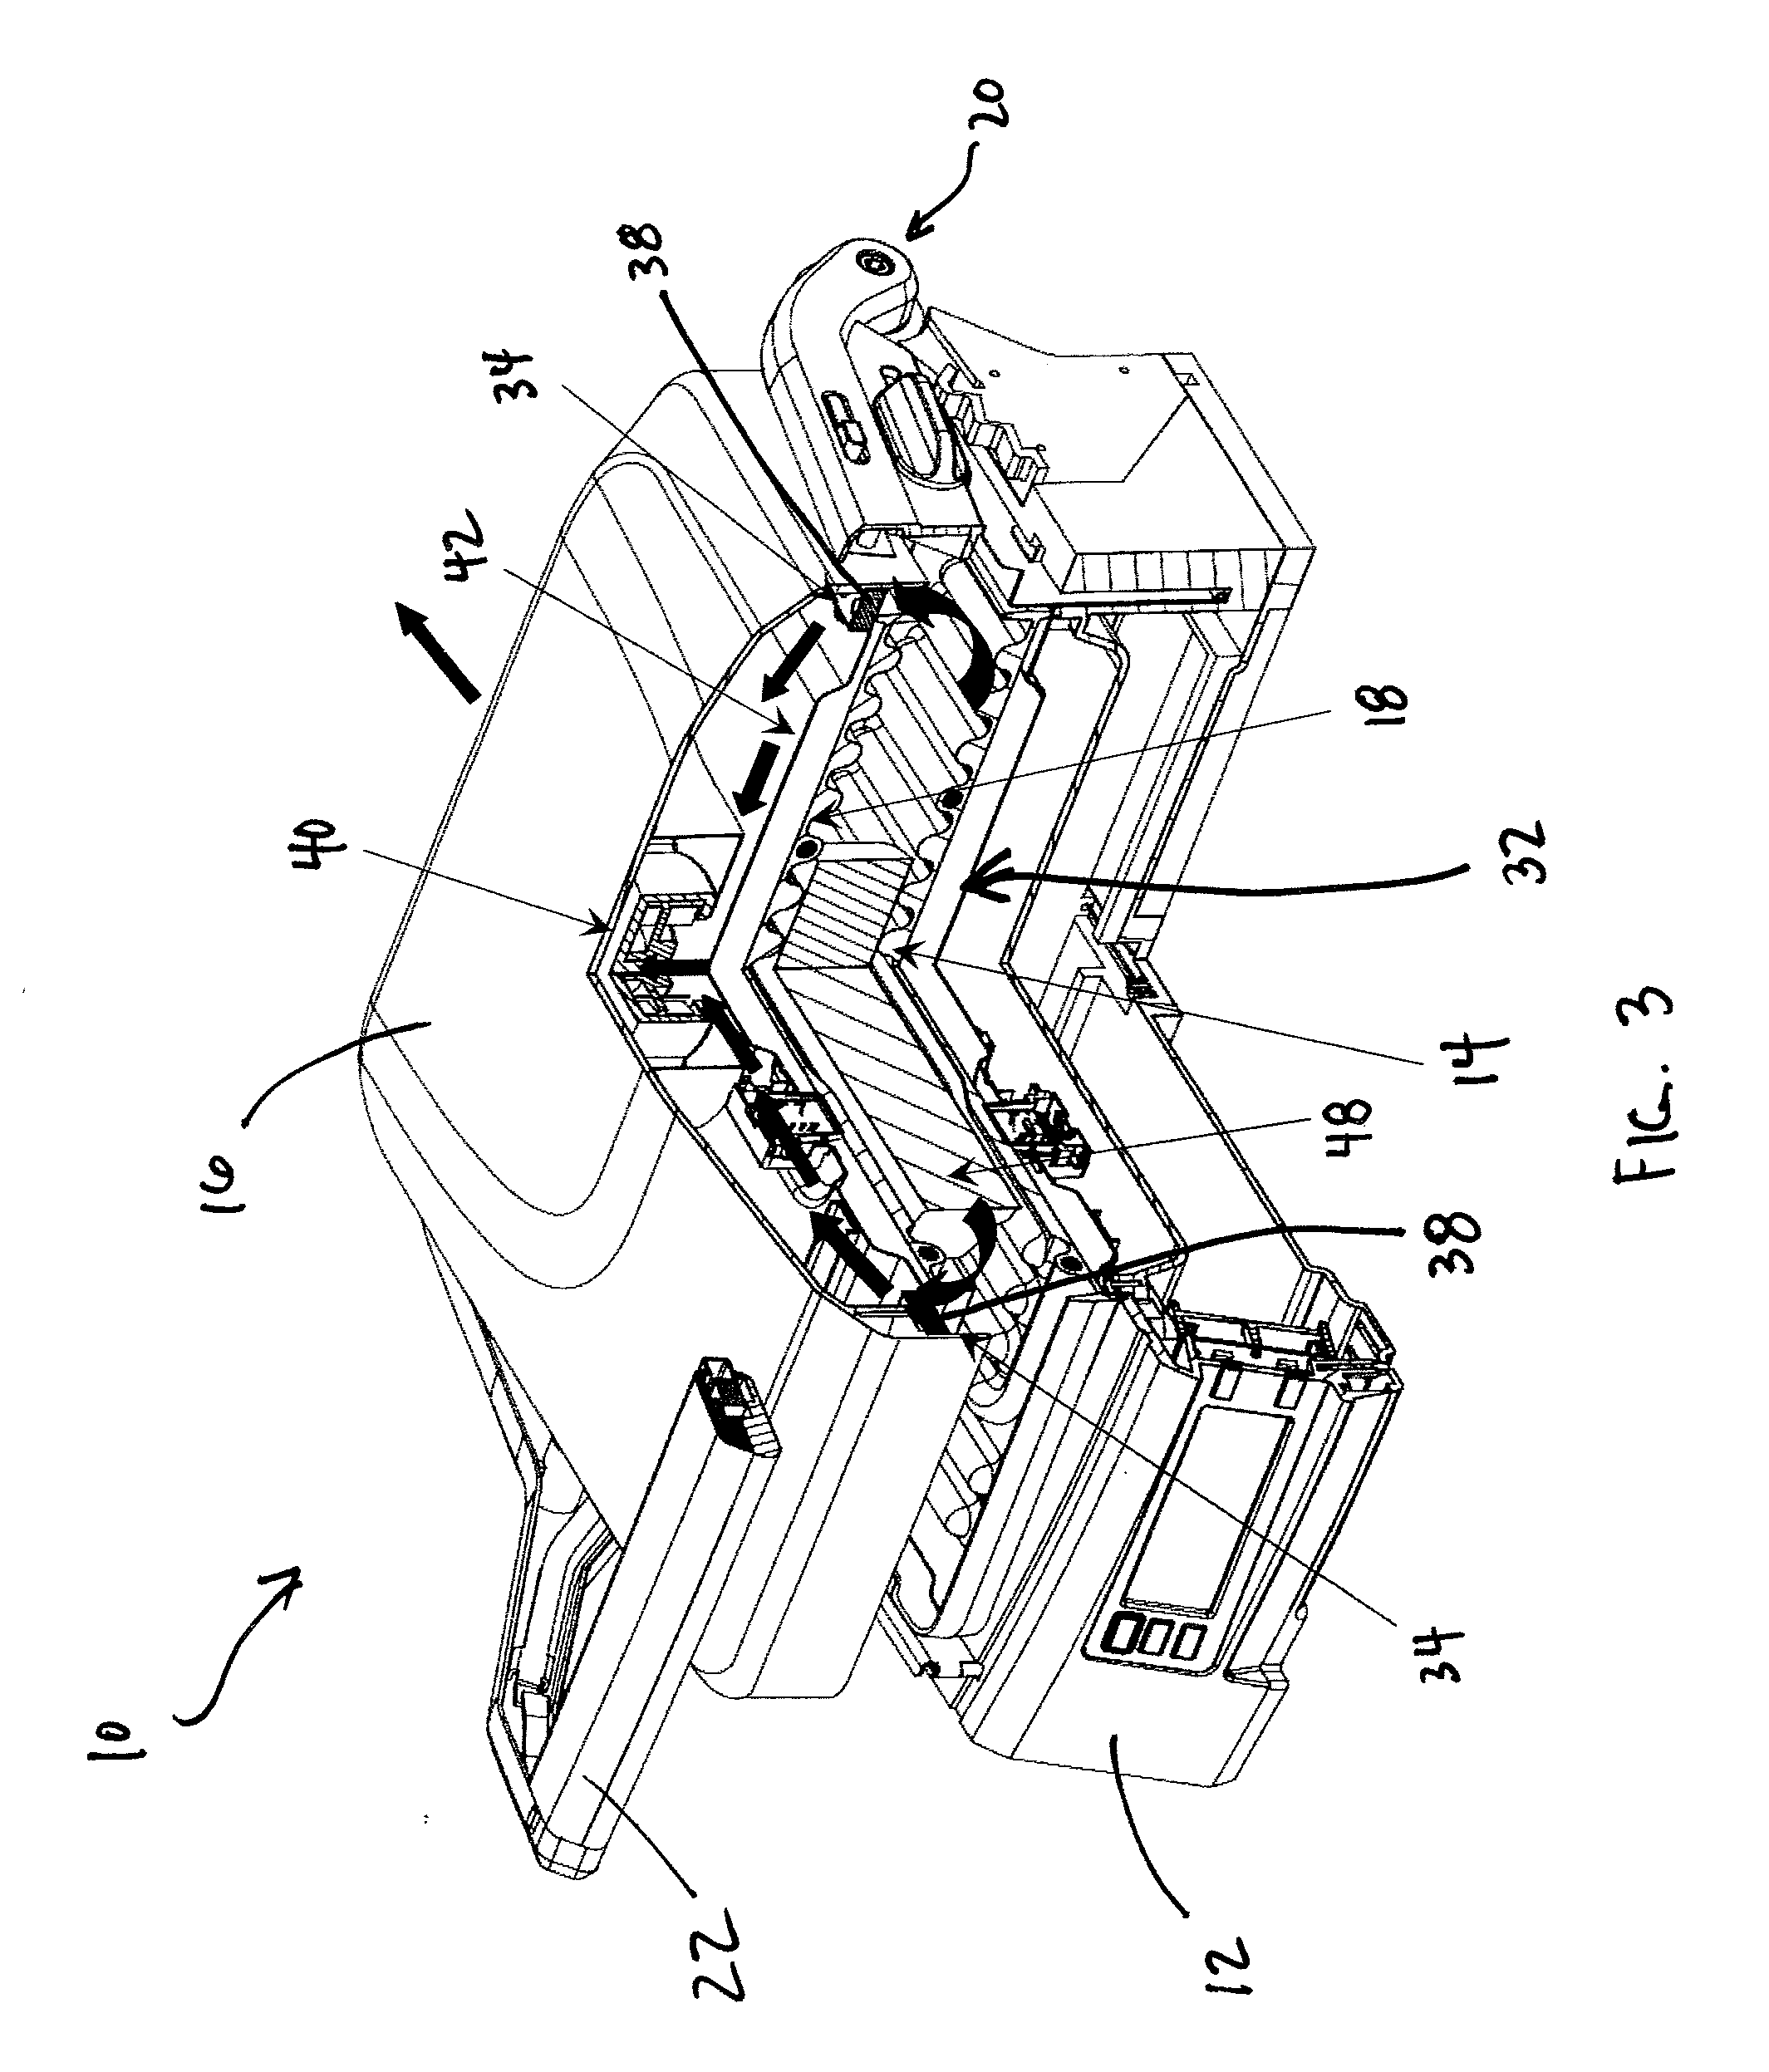 Smoke exhaust system for a cooking appliance